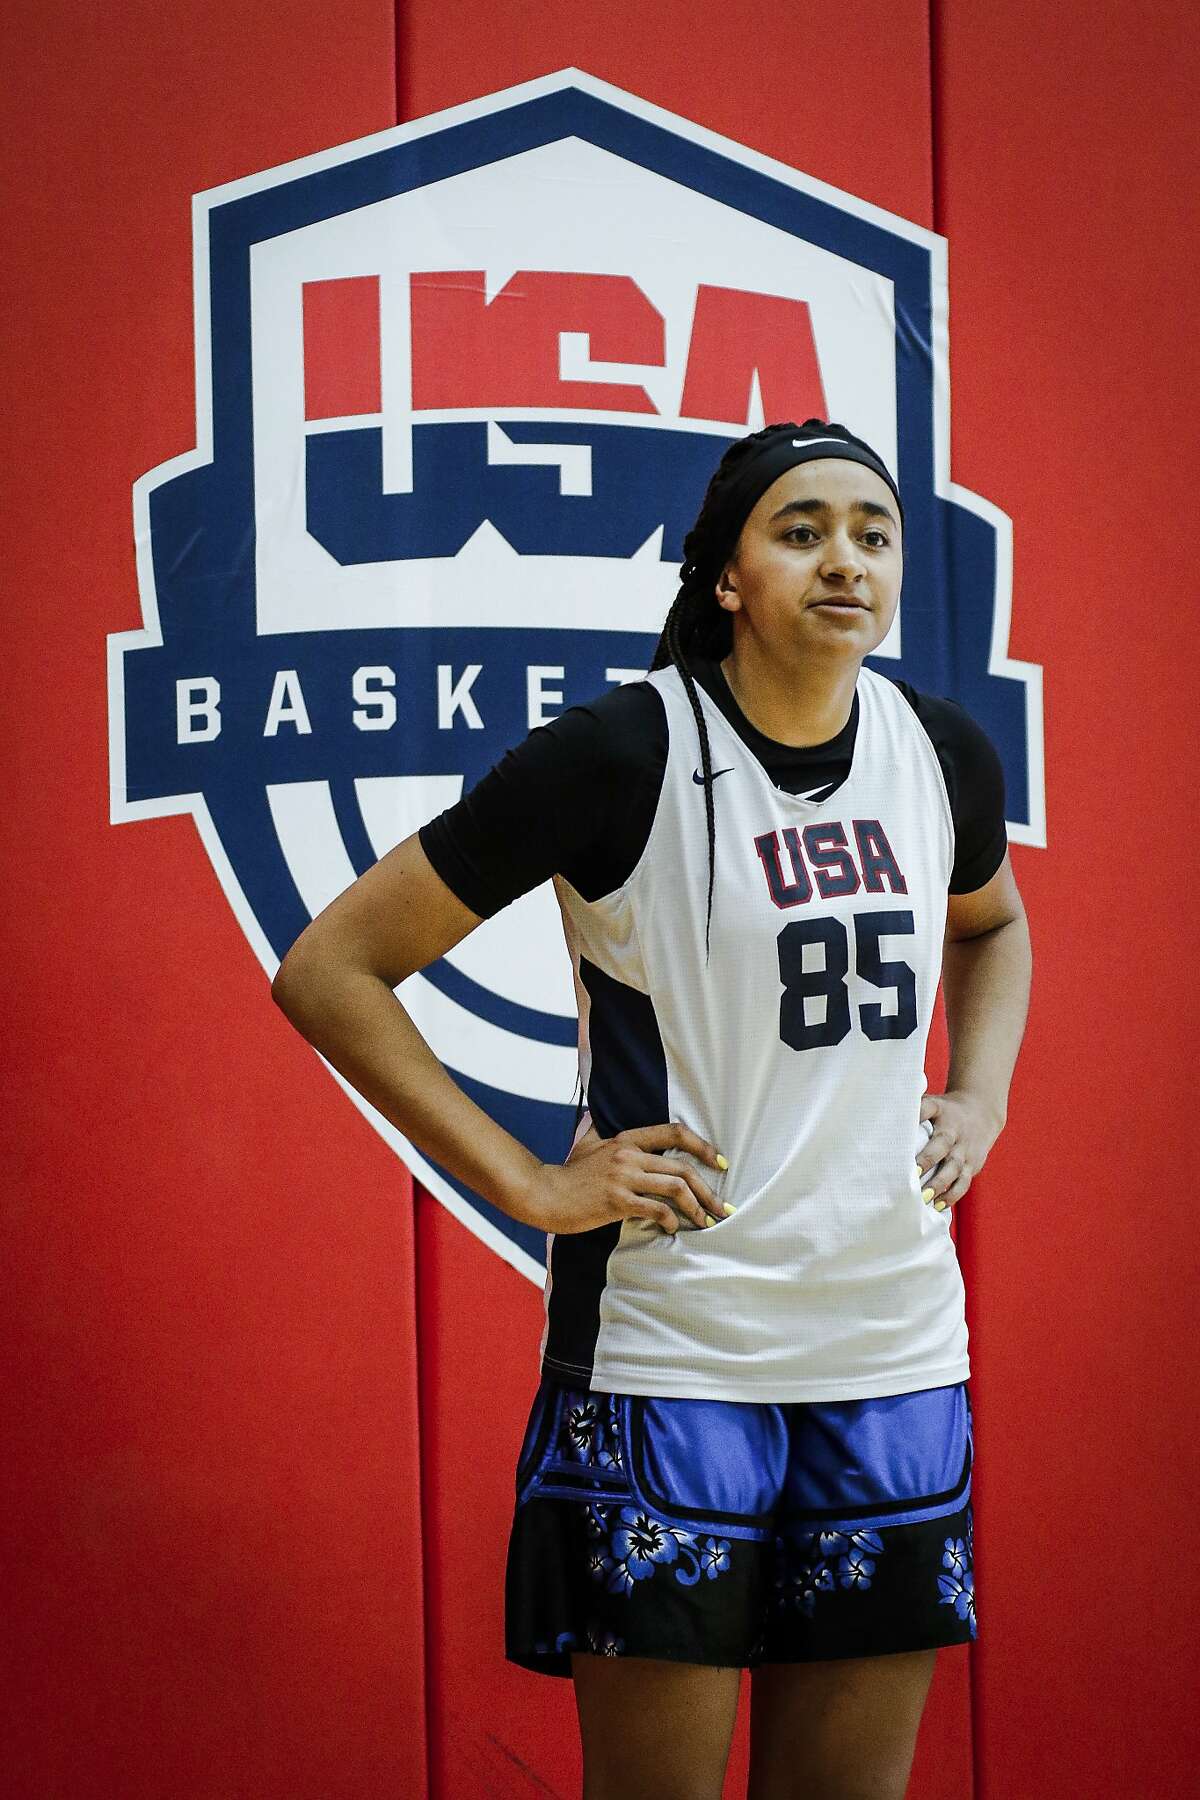 COLORADO SPRINGS, CO - MAY 25: Haley Jones #85 of Santa Cruz, Calif. participates in tryouts for the 2018 USA Basketball Women's U17 World Cup Team at the United States Olympic Training Center in Colorado Springs, Colorado. Finalists for the team will be announced on May 28 and will remain in Colorado Springs for training camp through May 30. (Photo by Marc Piscotty/Icon Sportswire via Getty Images)